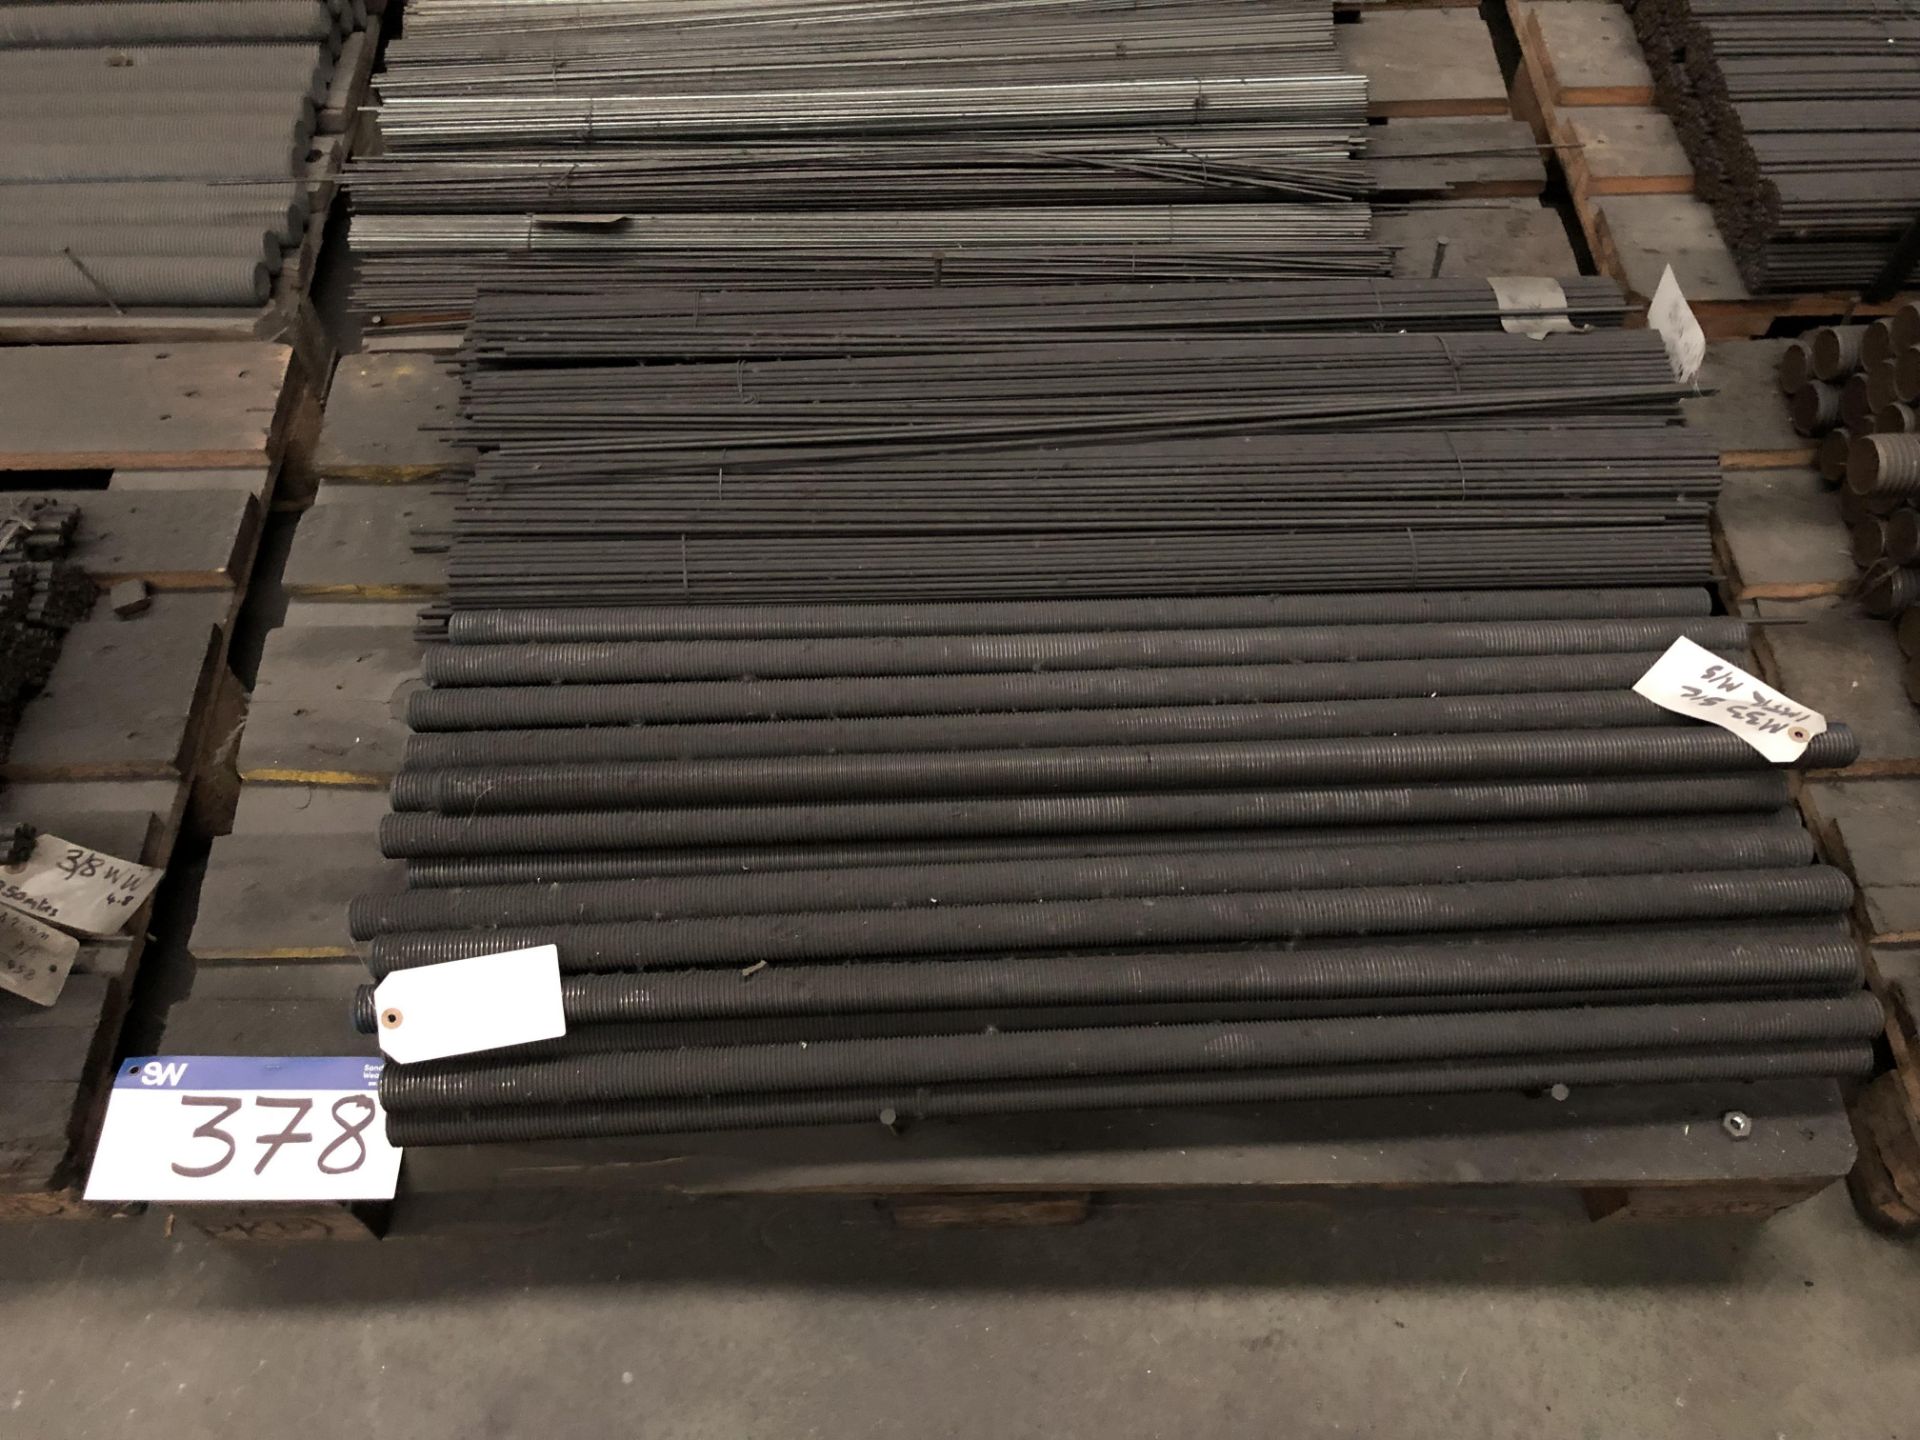 503kg Stainless Steel Threaded Bar, M33 - Image 2 of 3